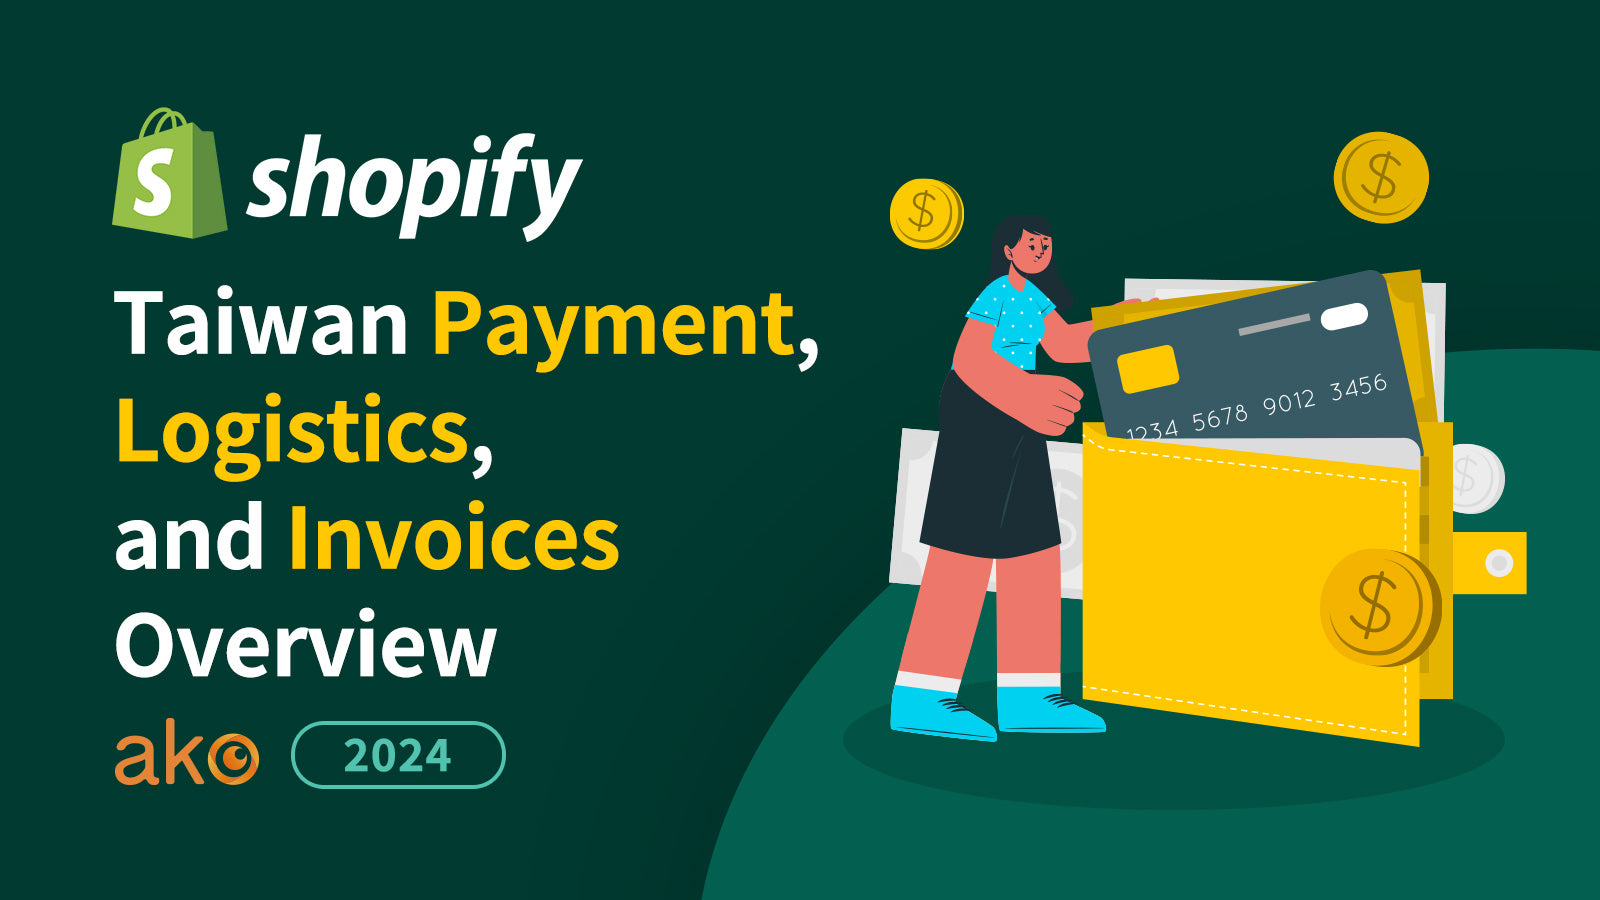 2024 Shopify Taiwan Payment, Logistics, and Invoices Overview